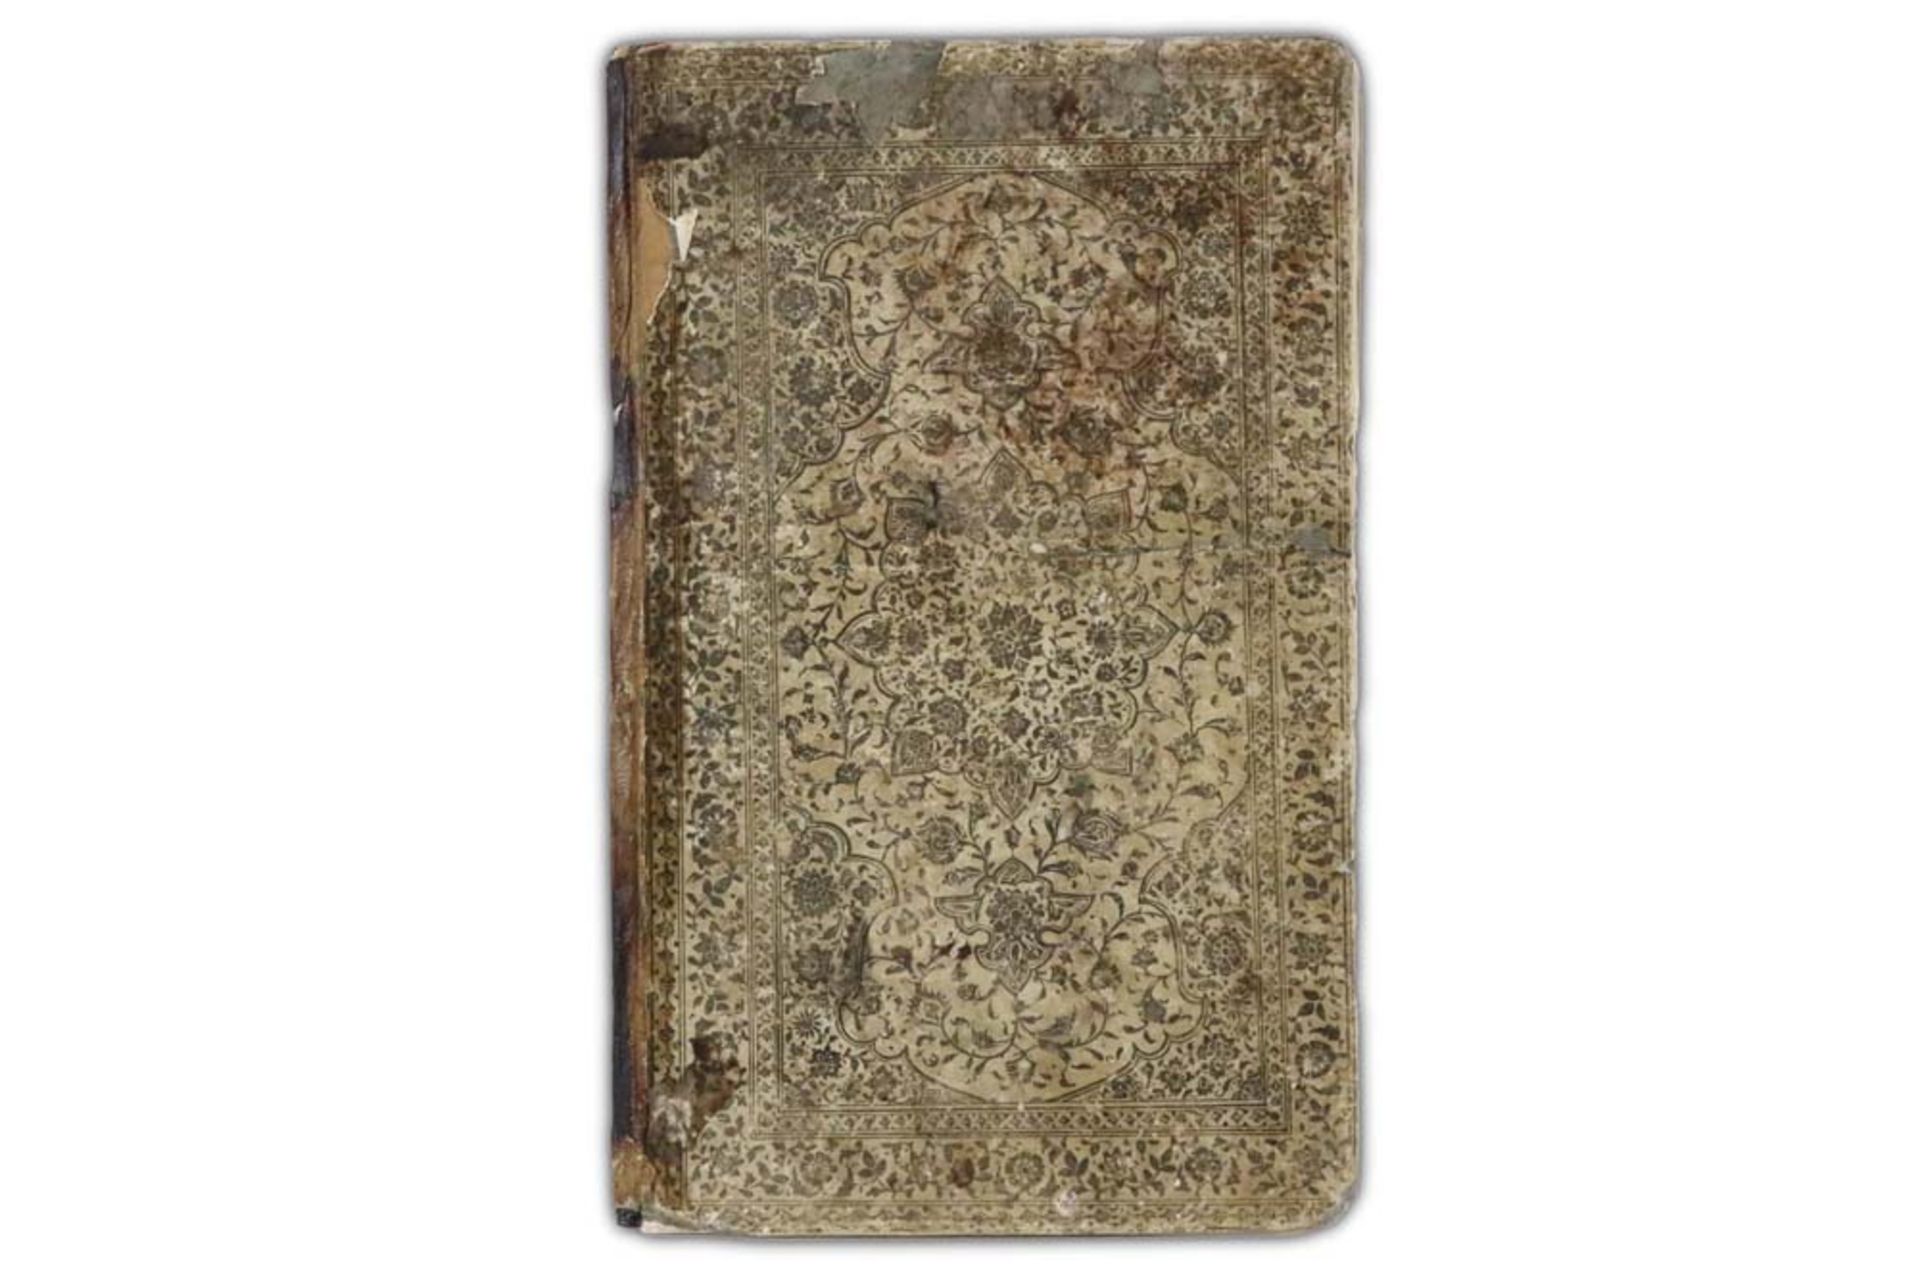 Persian book with various aquarelles and with a cover with printed paper || Perzisch boek met